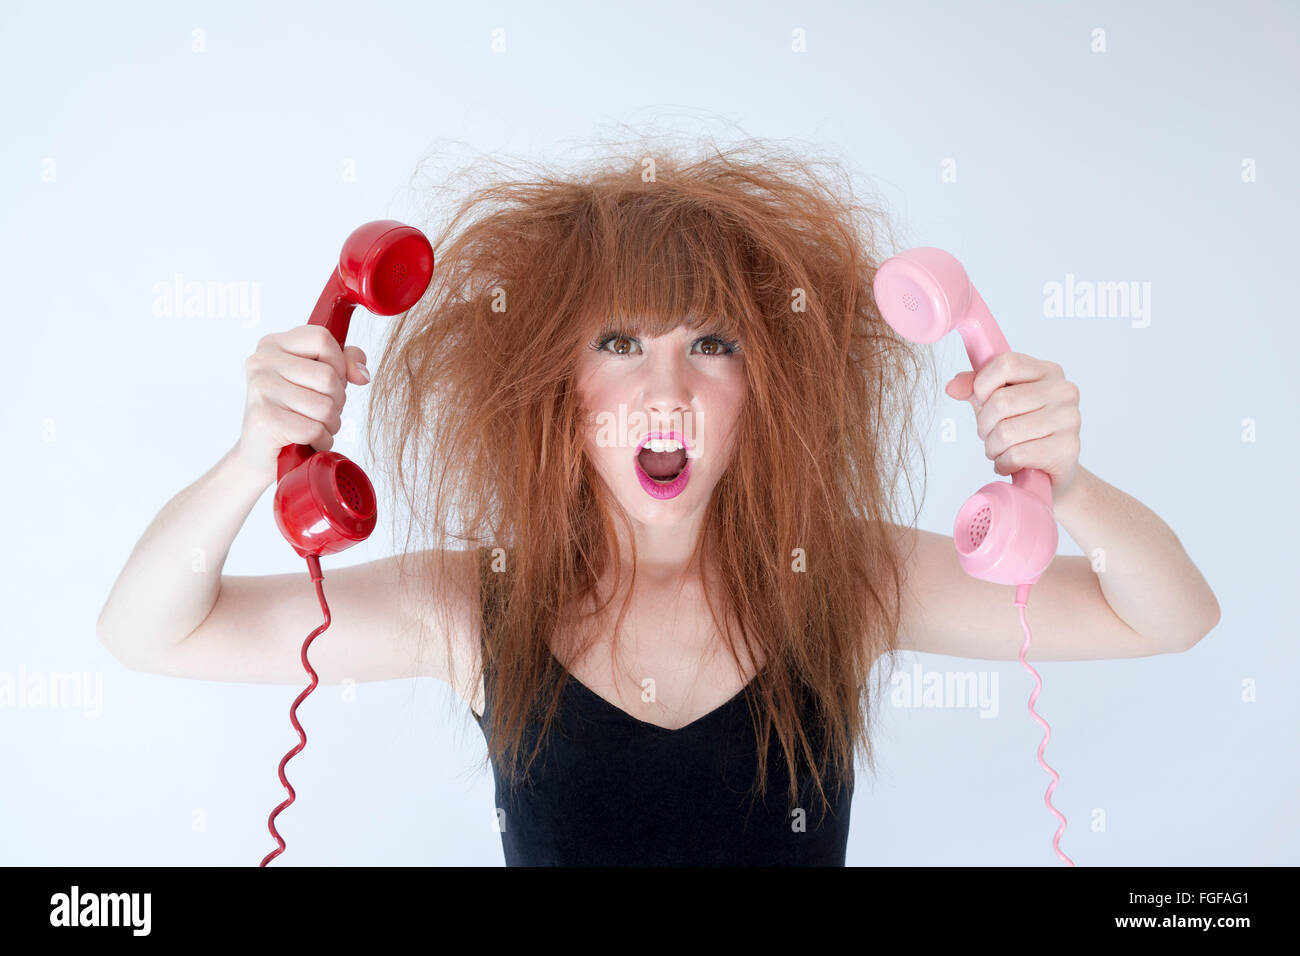 Woman with messy hair holding two retro telephones screaming Stock Photo